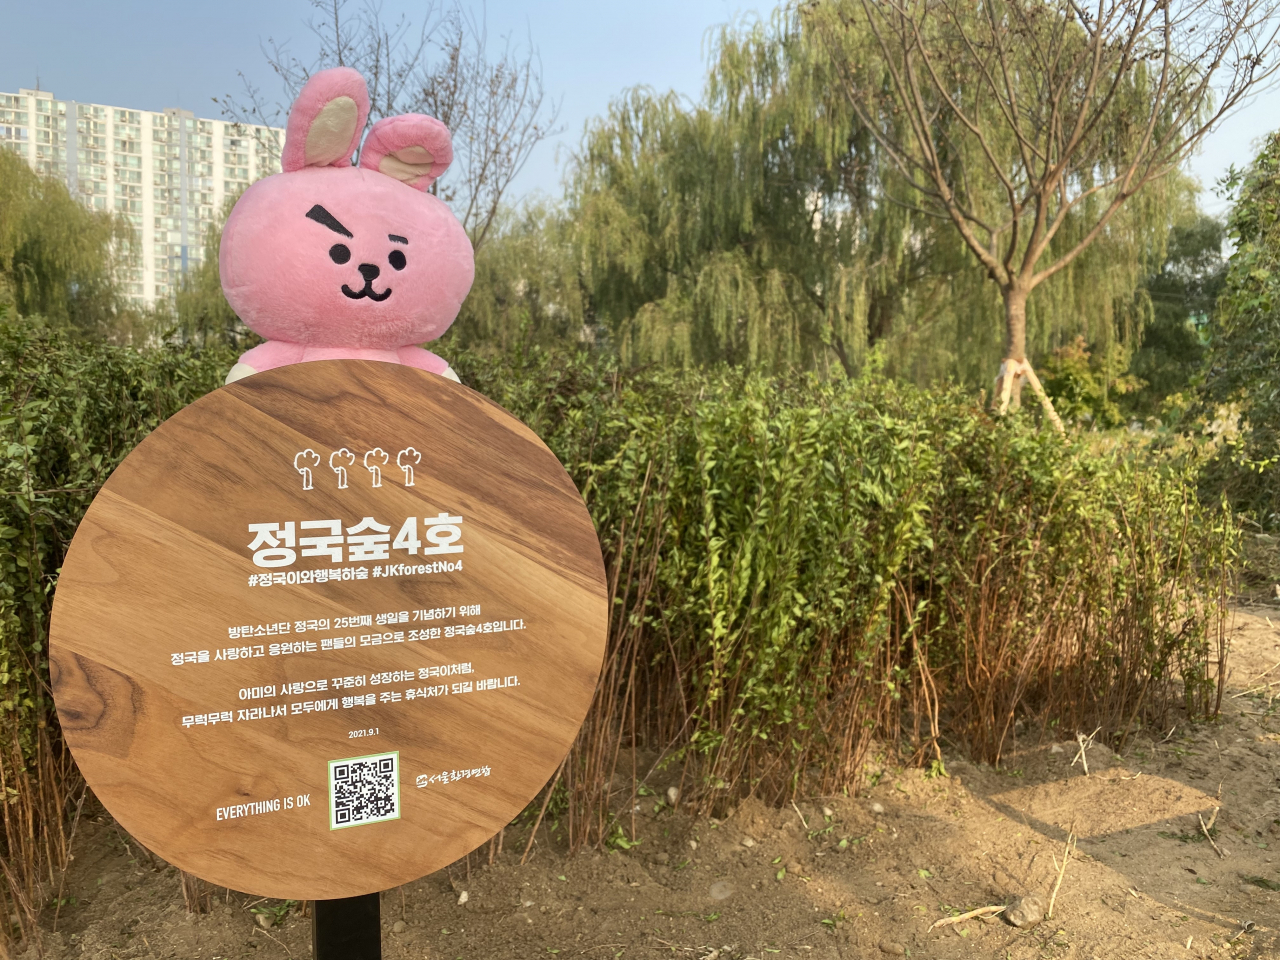 This image shows a forest named after boy band BTS’ Jungkook. (Seoul Metropolitan Government)